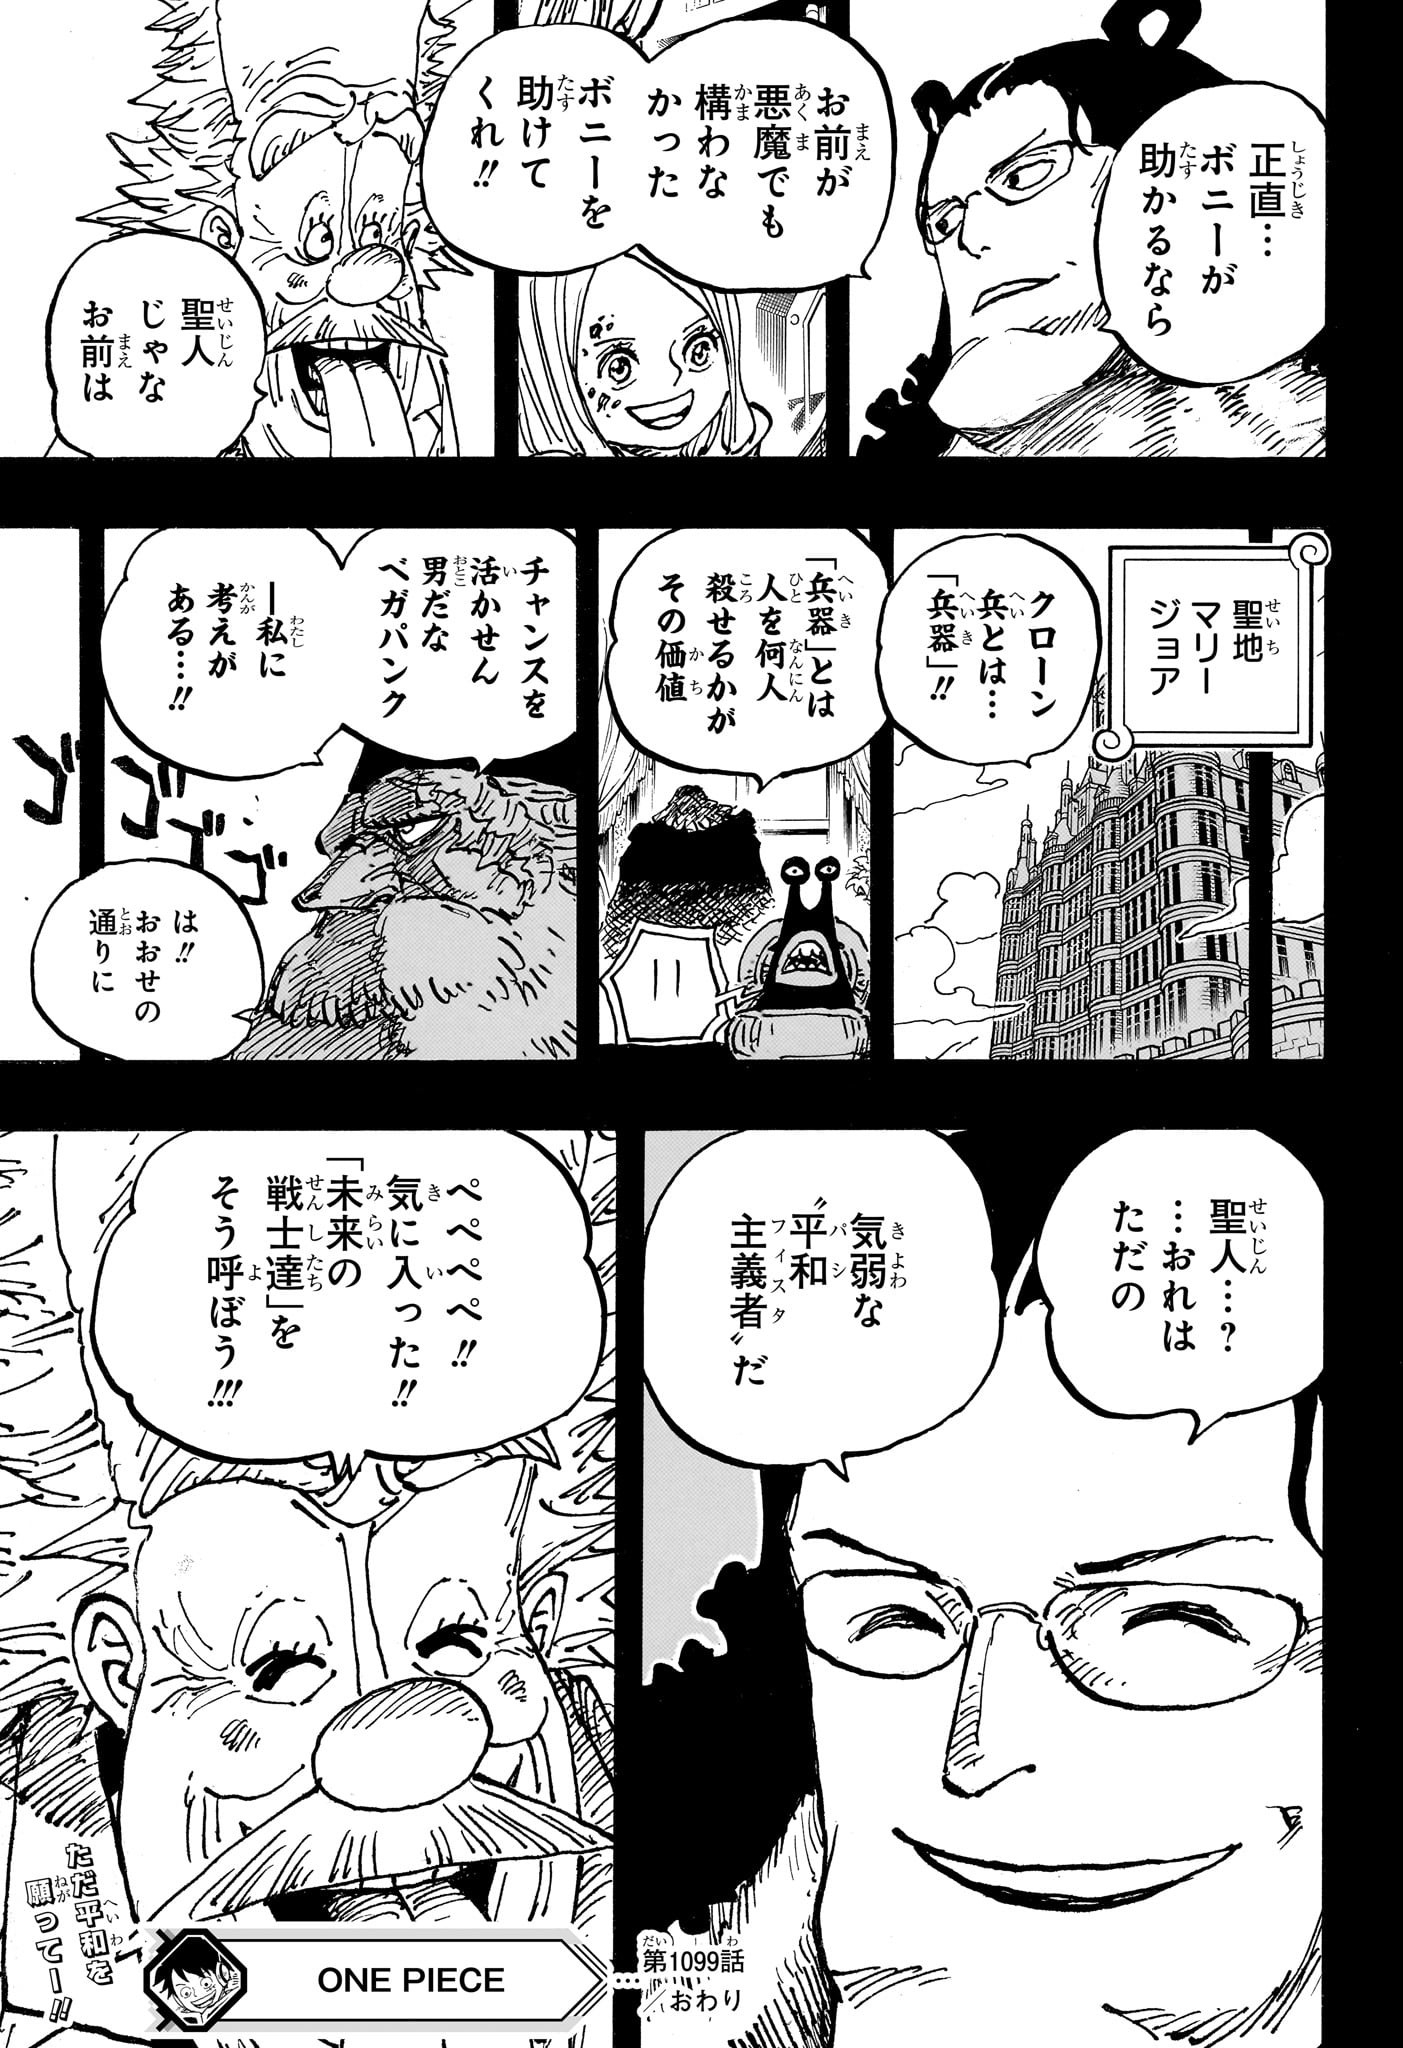 One Piece - Chapter 1099 - Page 17